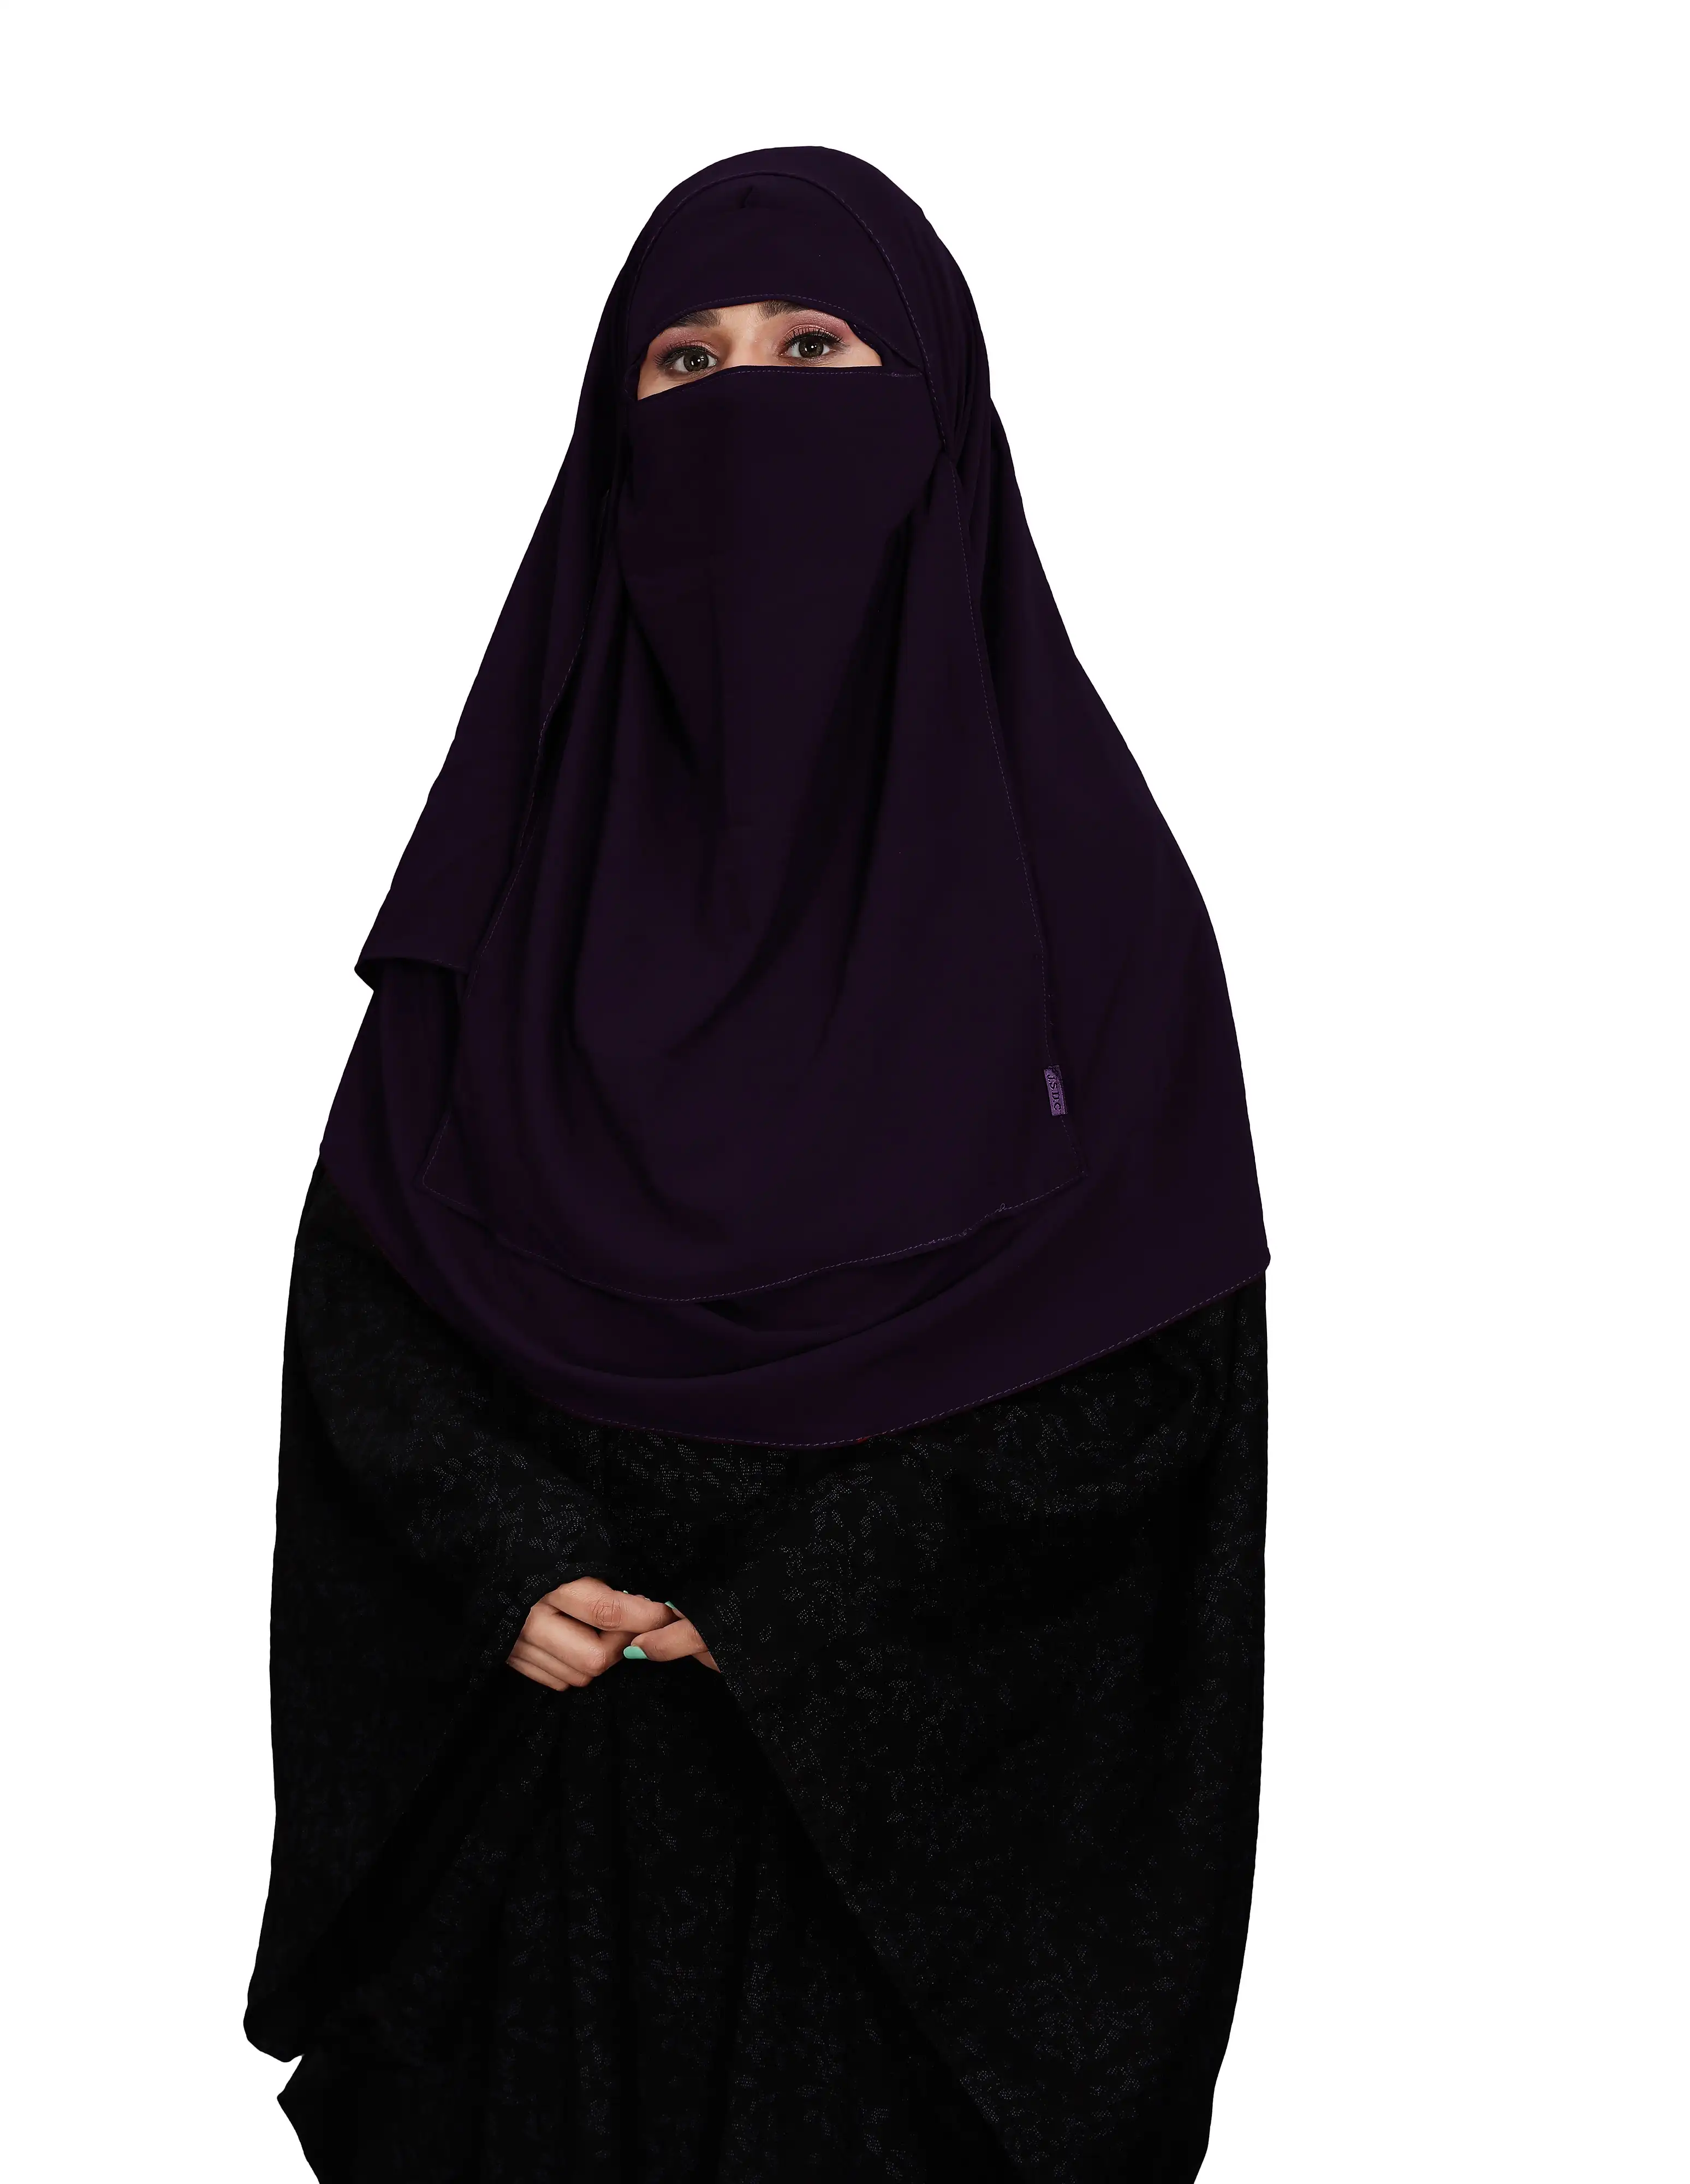 Top Hot Selling New Arrival Instant Ready to Wear Hijab + Niqab Supplier Women Muslim Wear